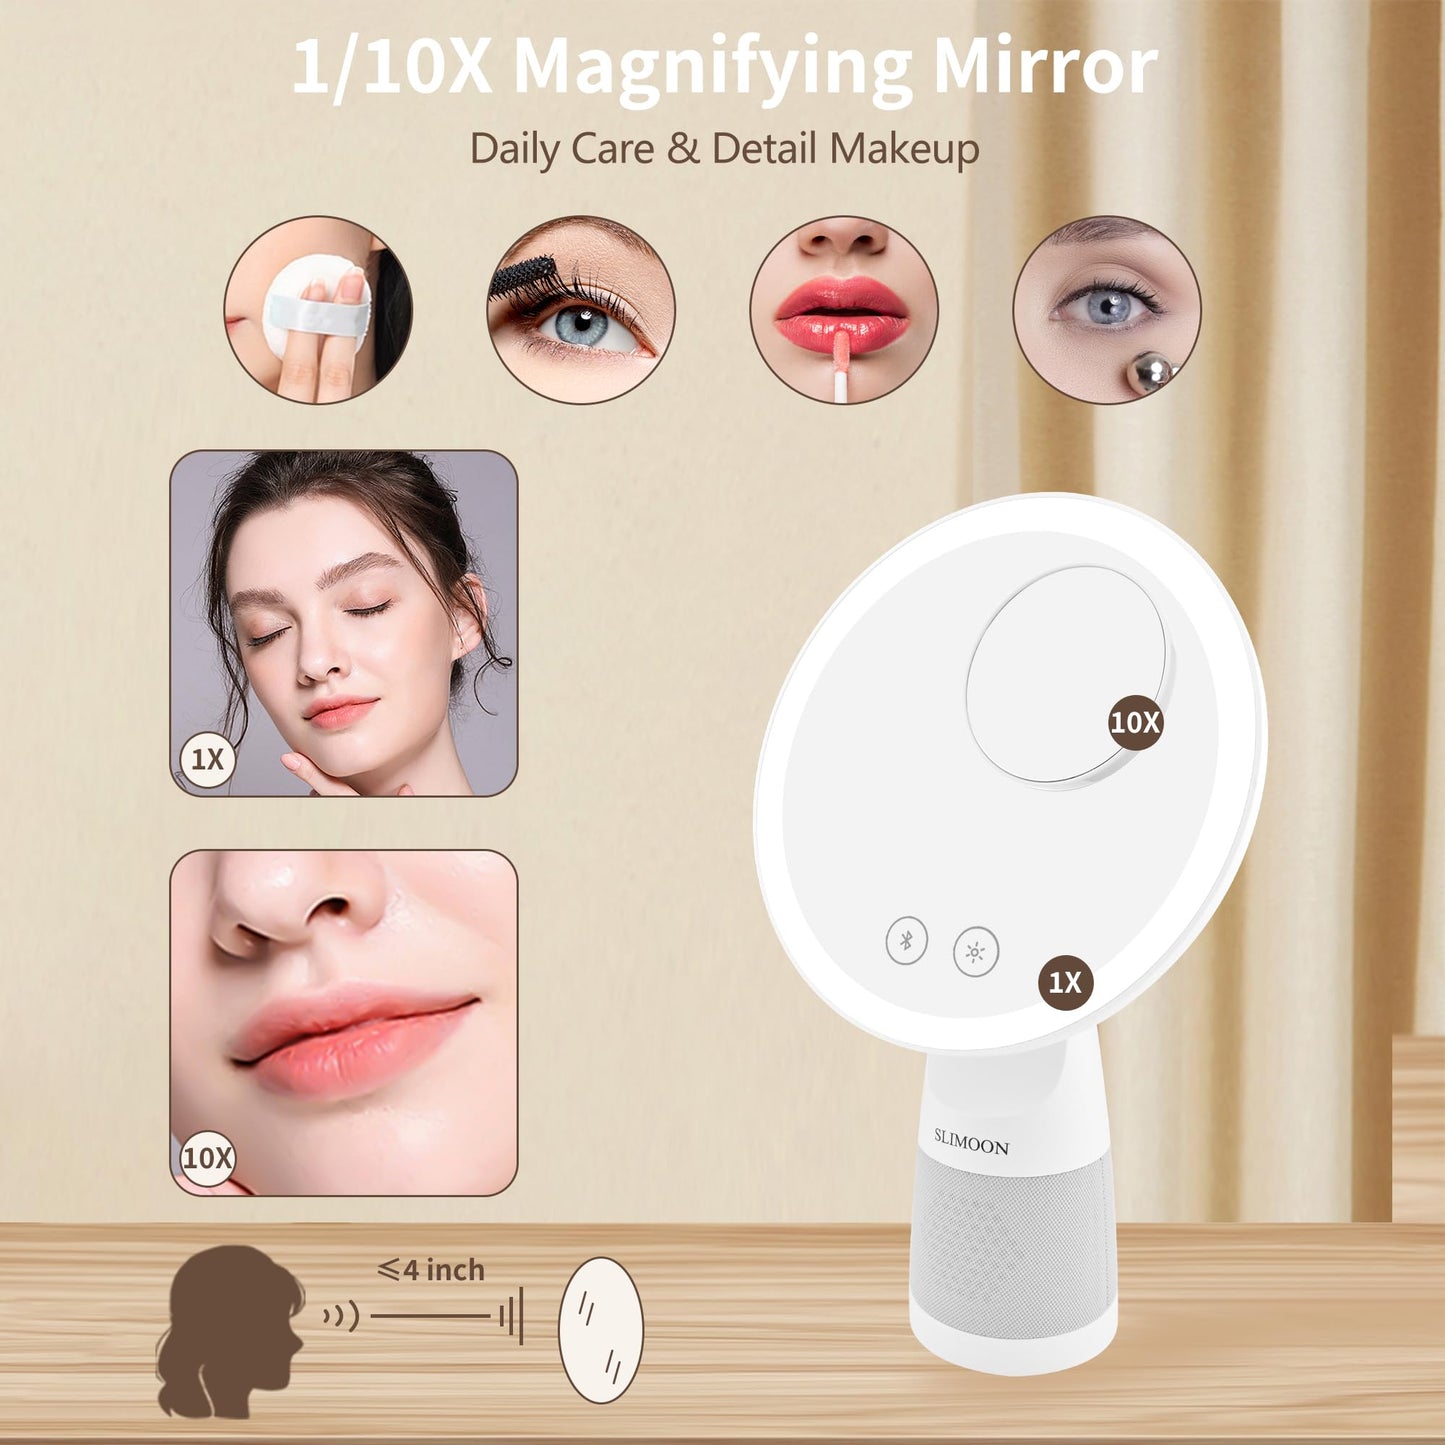 SLIMOON 9" Vanity Mirror with Lights and Bluetooth Speaker, 1X/10X Magnifying Vanity Mirror with 3 Colors Dimmable Lights, Support for Answering Calls, 4000mAh Rechargeable Lighted Makeup Mirror